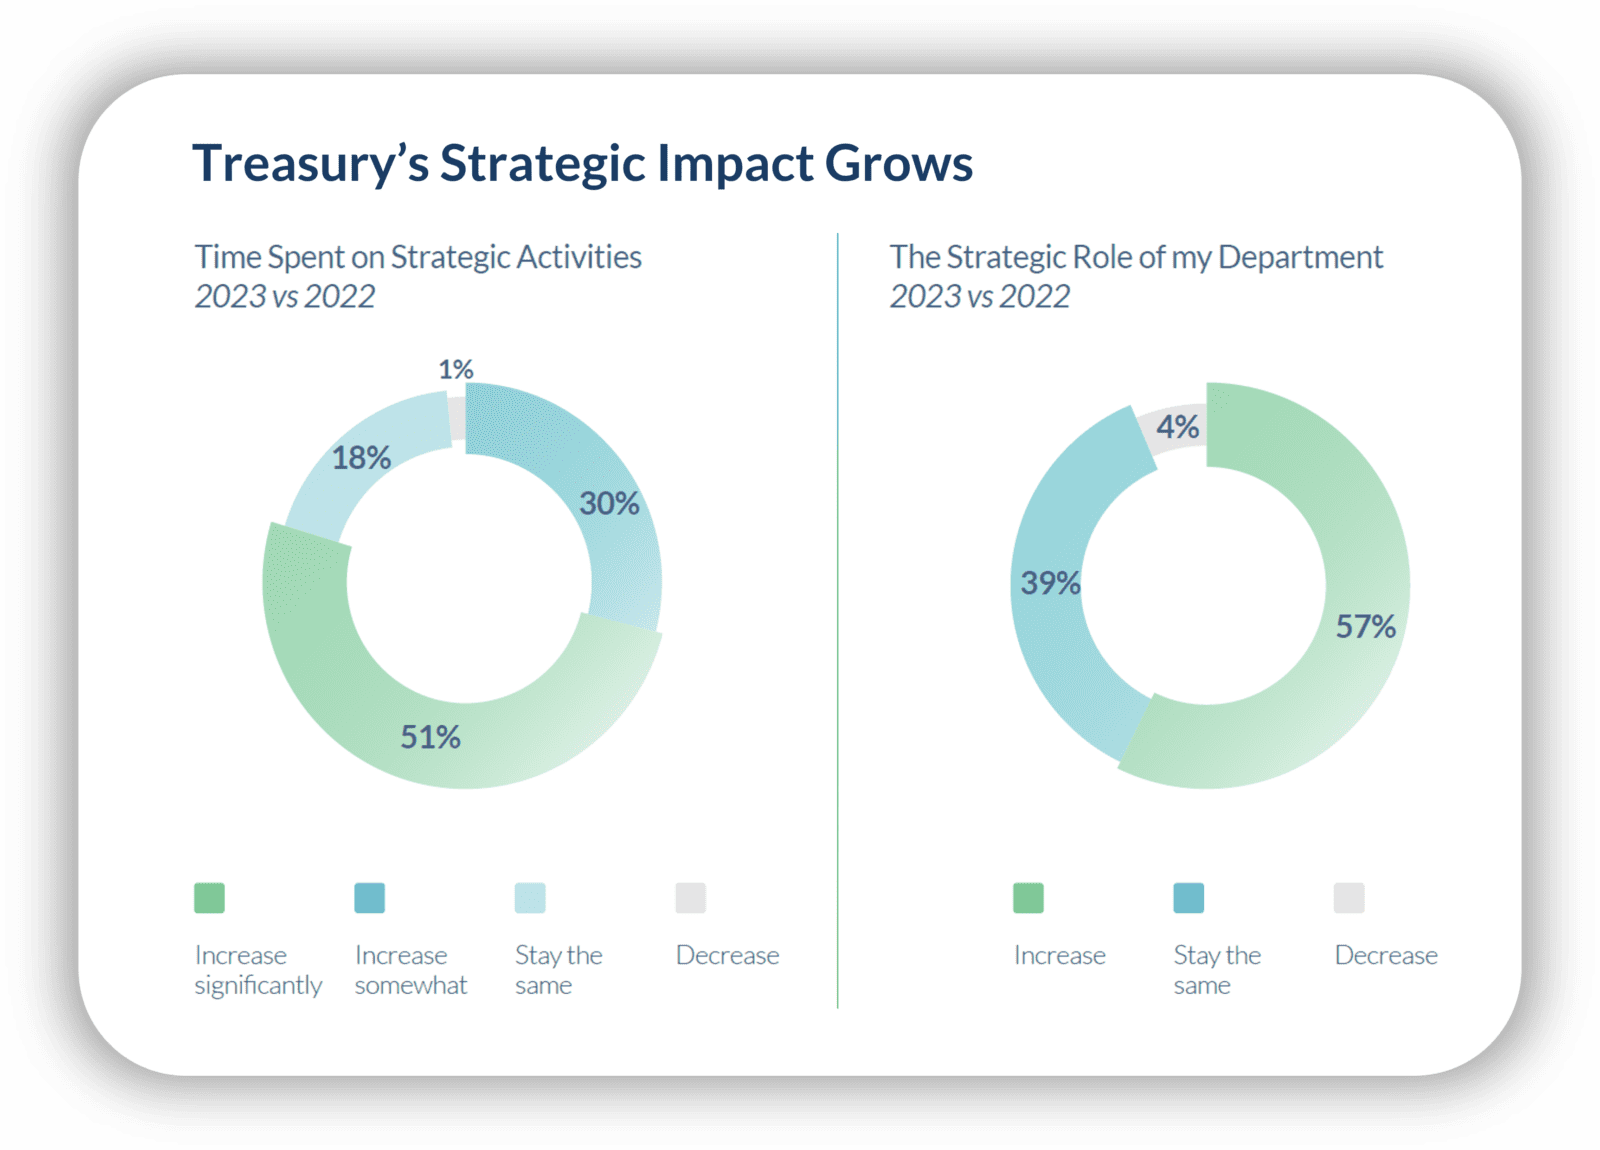 Treasury's strategic impact is projected to grow in 2023 based on recent industry survey data. 